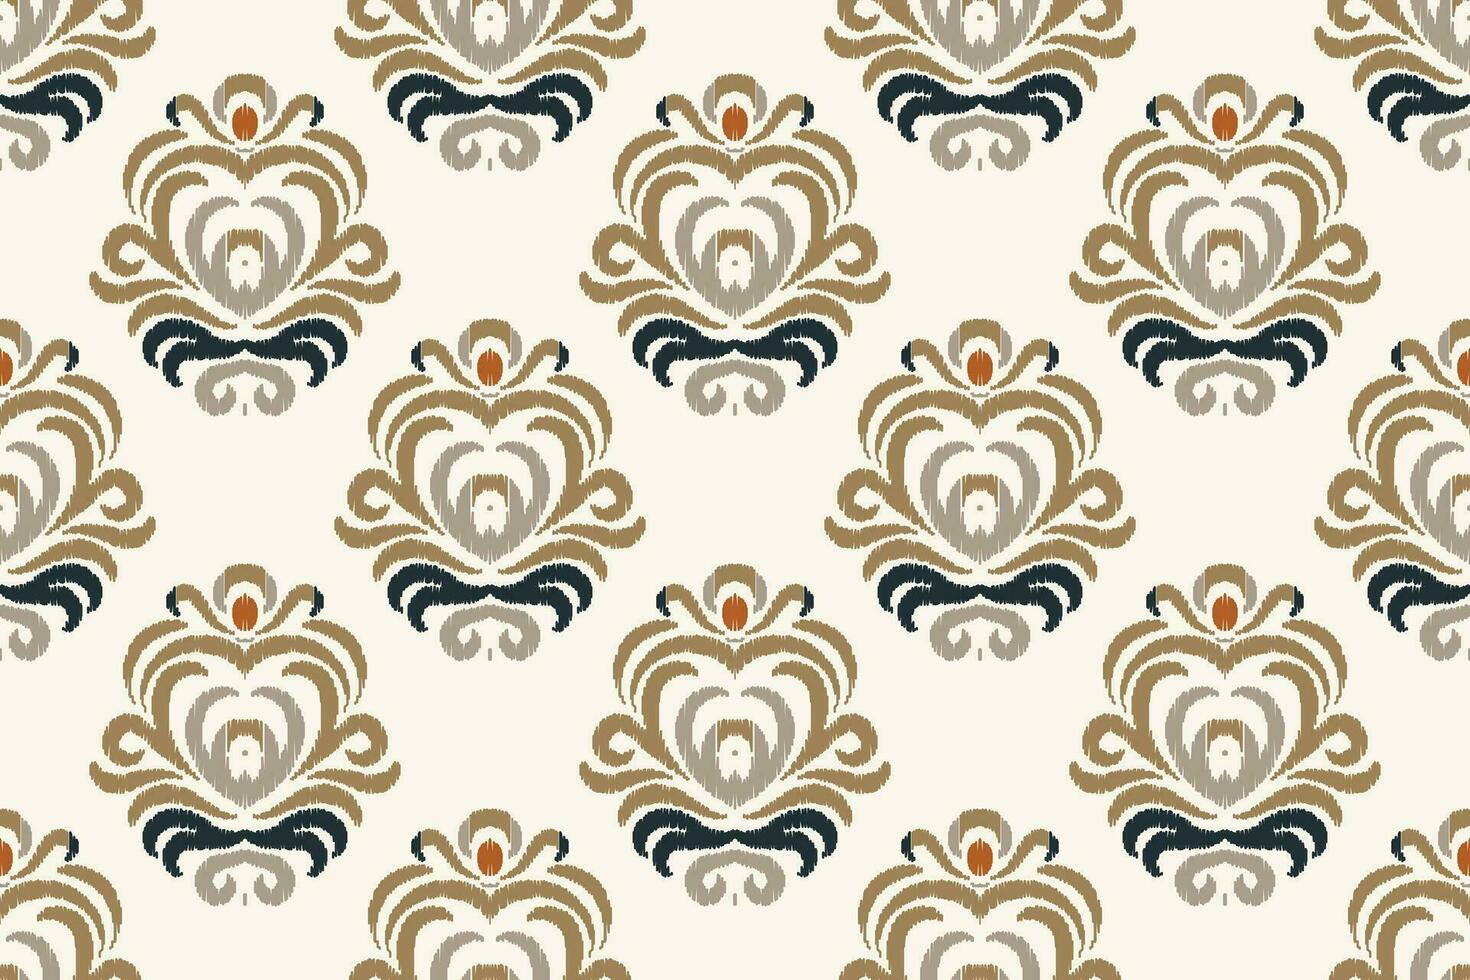 Ikat Damask Paisley Embroidery Background. Ikat Design Geometric Ethnic Oriental Pattern traditional.aztec Style Abstract Vector illustration.design for Texture,fabric,clothing,wrapping,sarong.